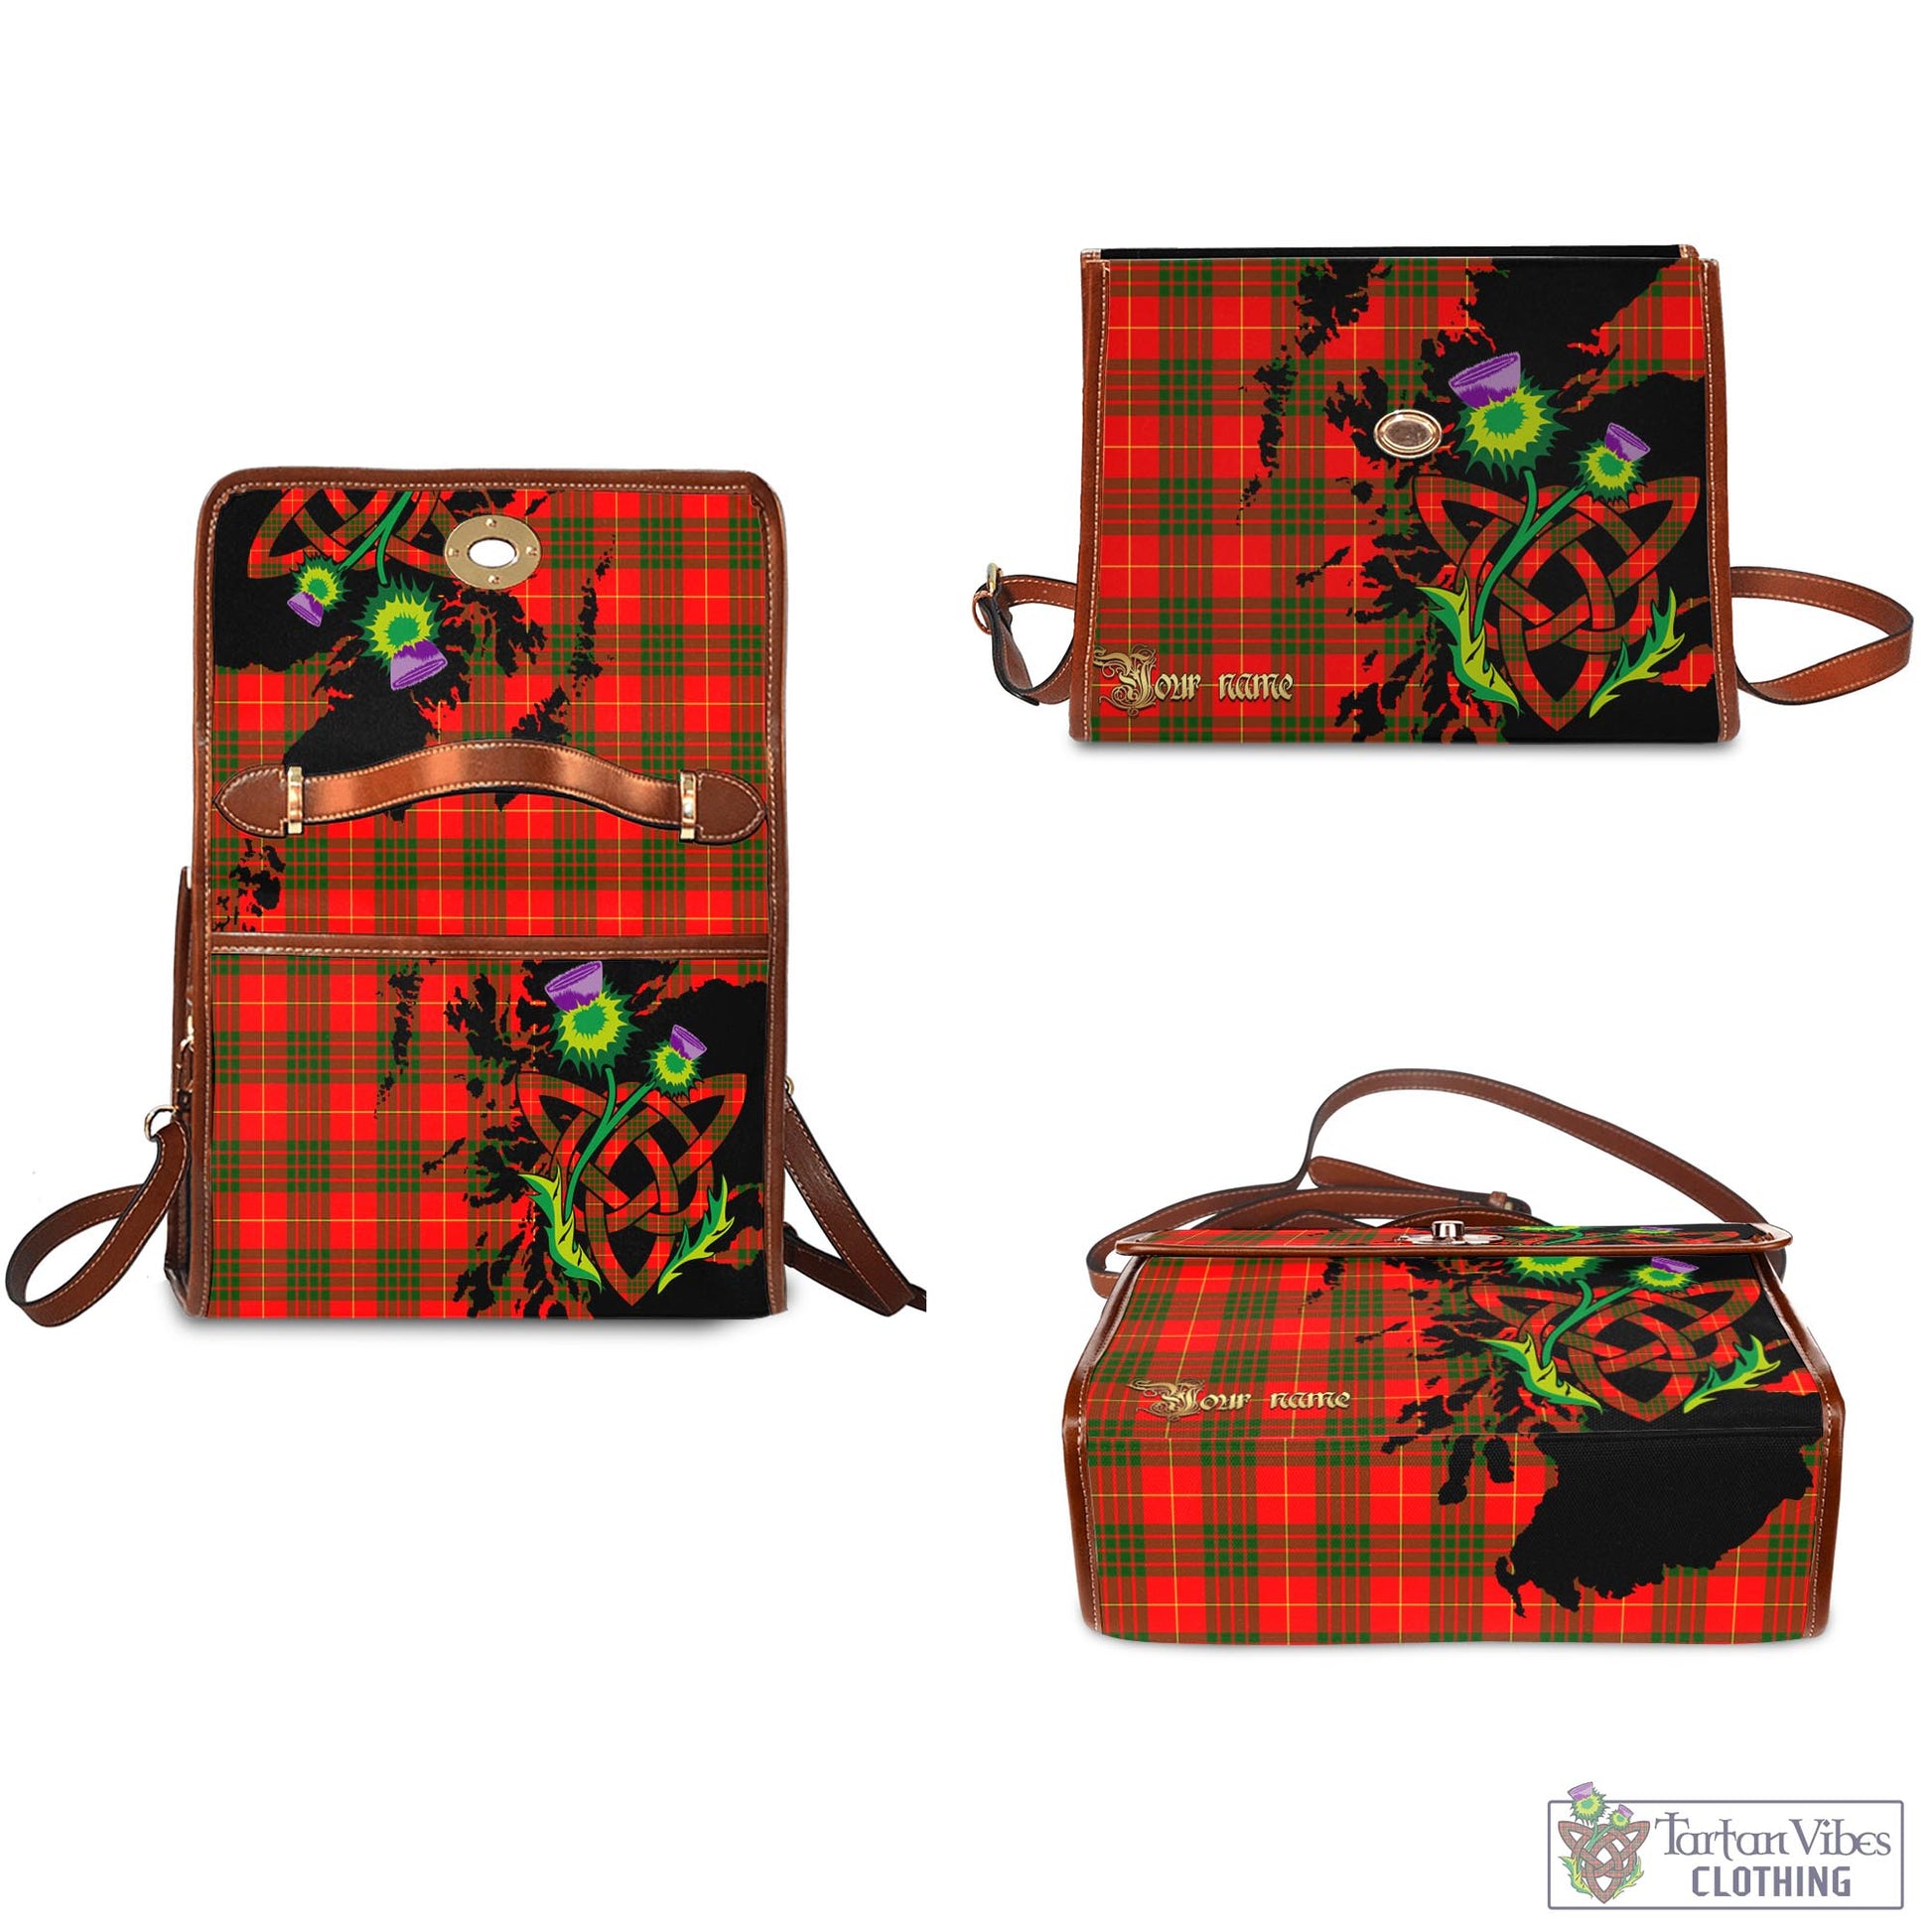 Tartan Vibes Clothing Cameron Modern Tartan Waterproof Canvas Bag with Scotland Map and Thistle Celtic Accents